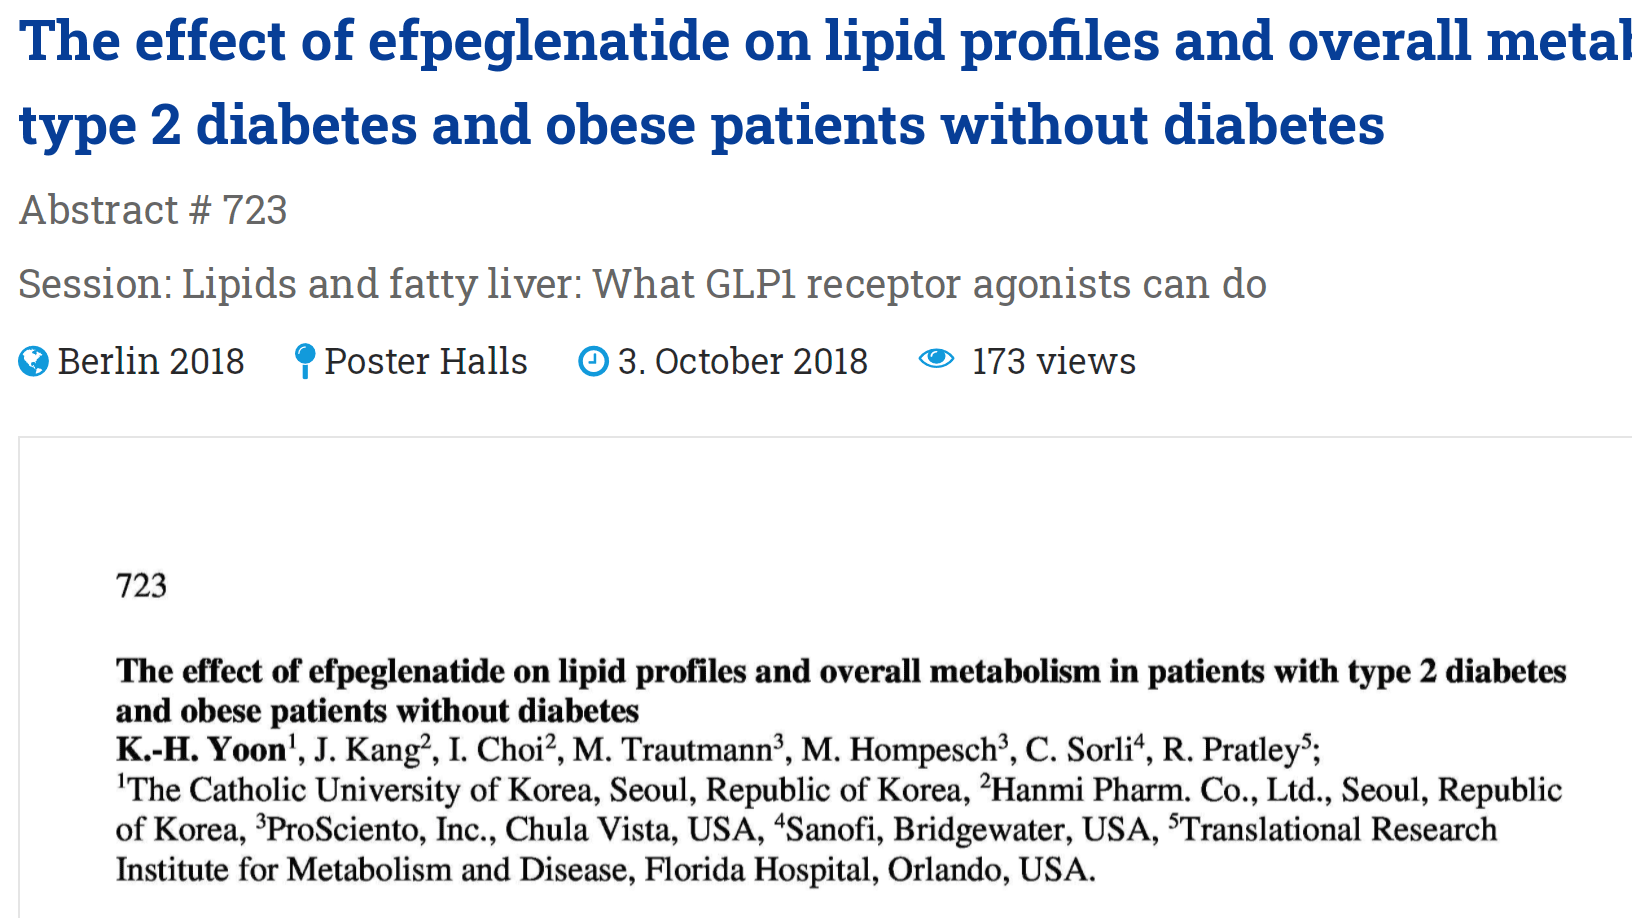 image of The effect of efpeglenatide on lipid profiles and overall metabolism in patients with type 2 diabetes and obese patients without diabetes